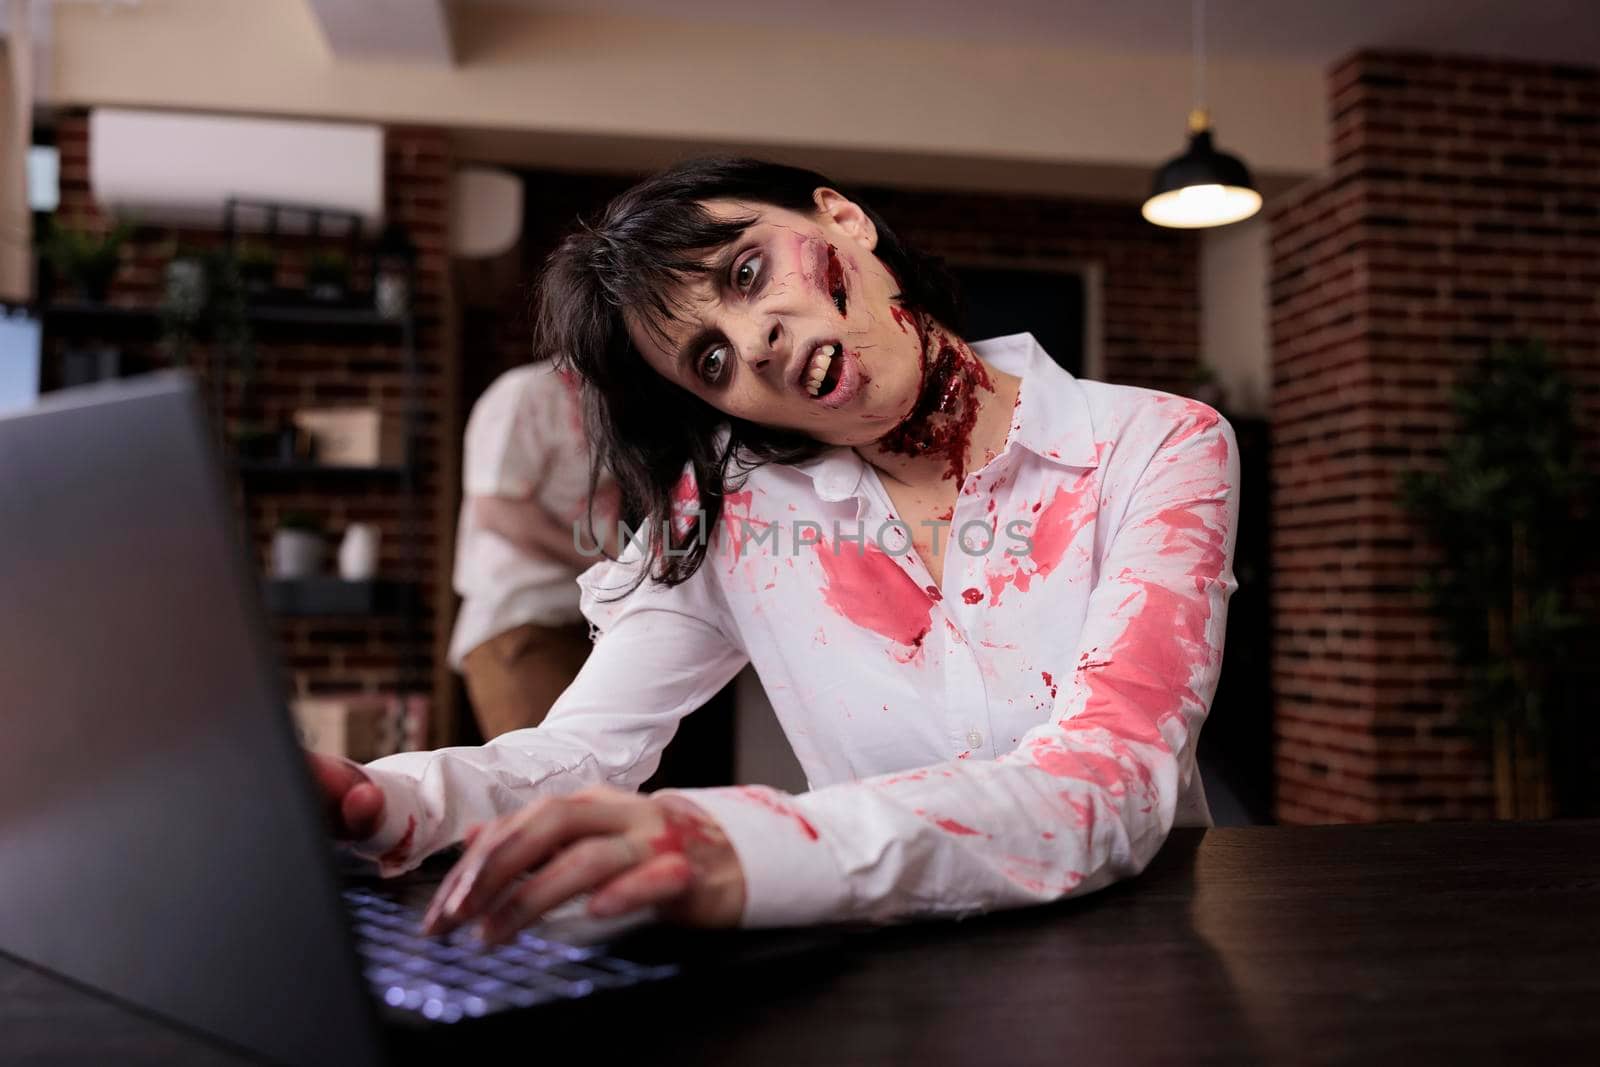 Aggressive devil corpse looking at laptop, sitting at office desk and being dangerous. Brain eating woman monster with bloody gory wounds being dramatic and eerie with mouth open.